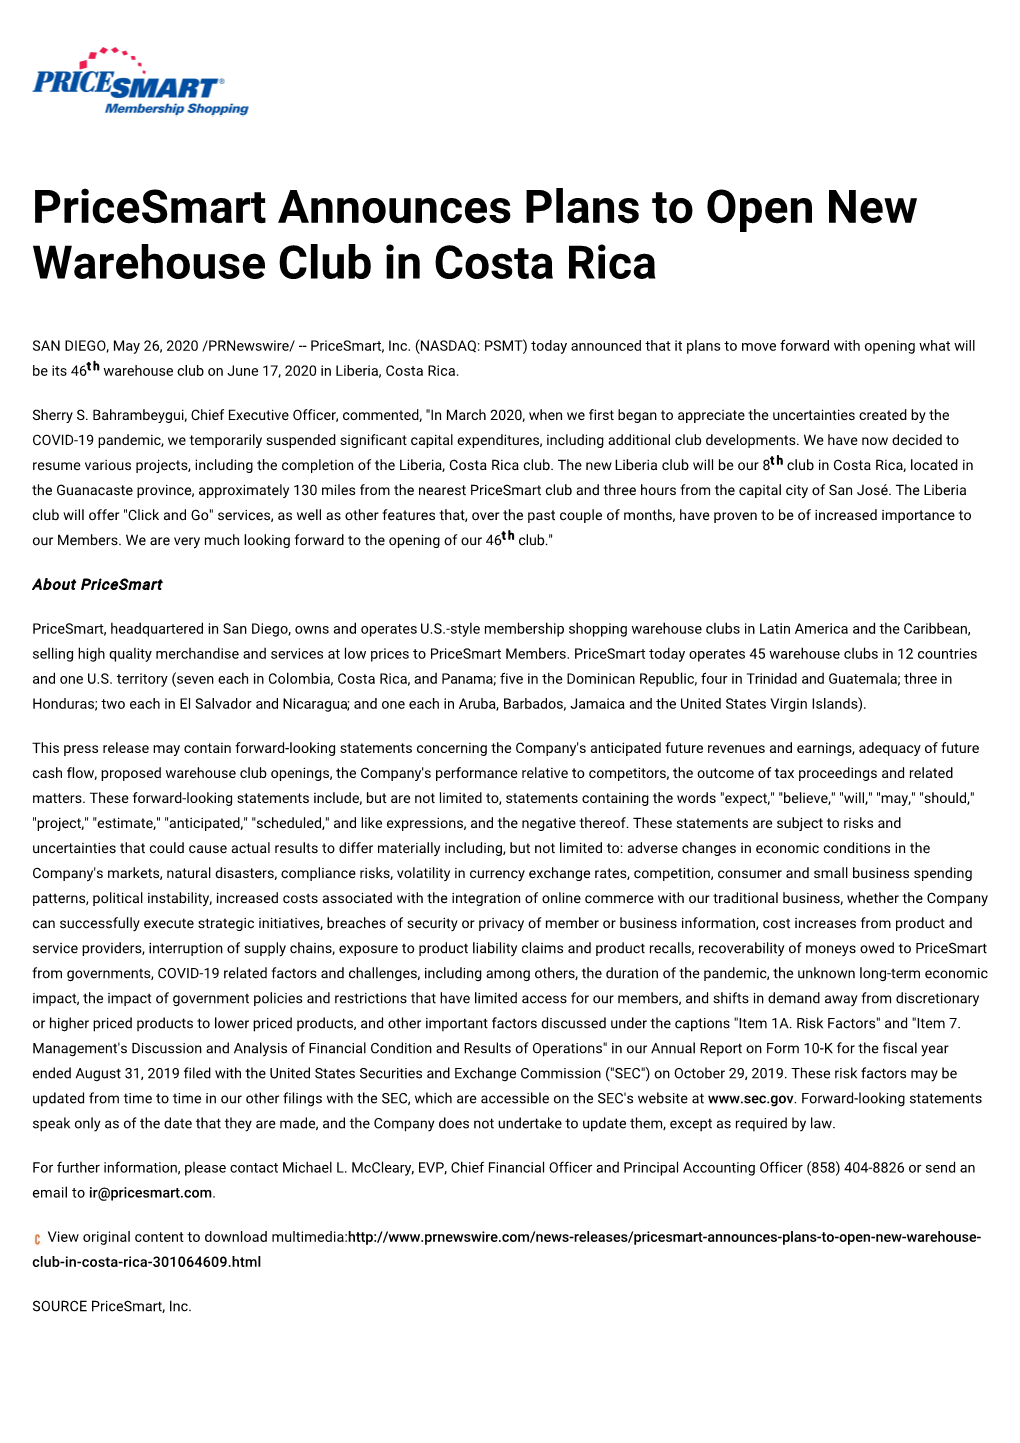 Pricesmart Announces Plans to Open New Warehouse Club in Costa Rica